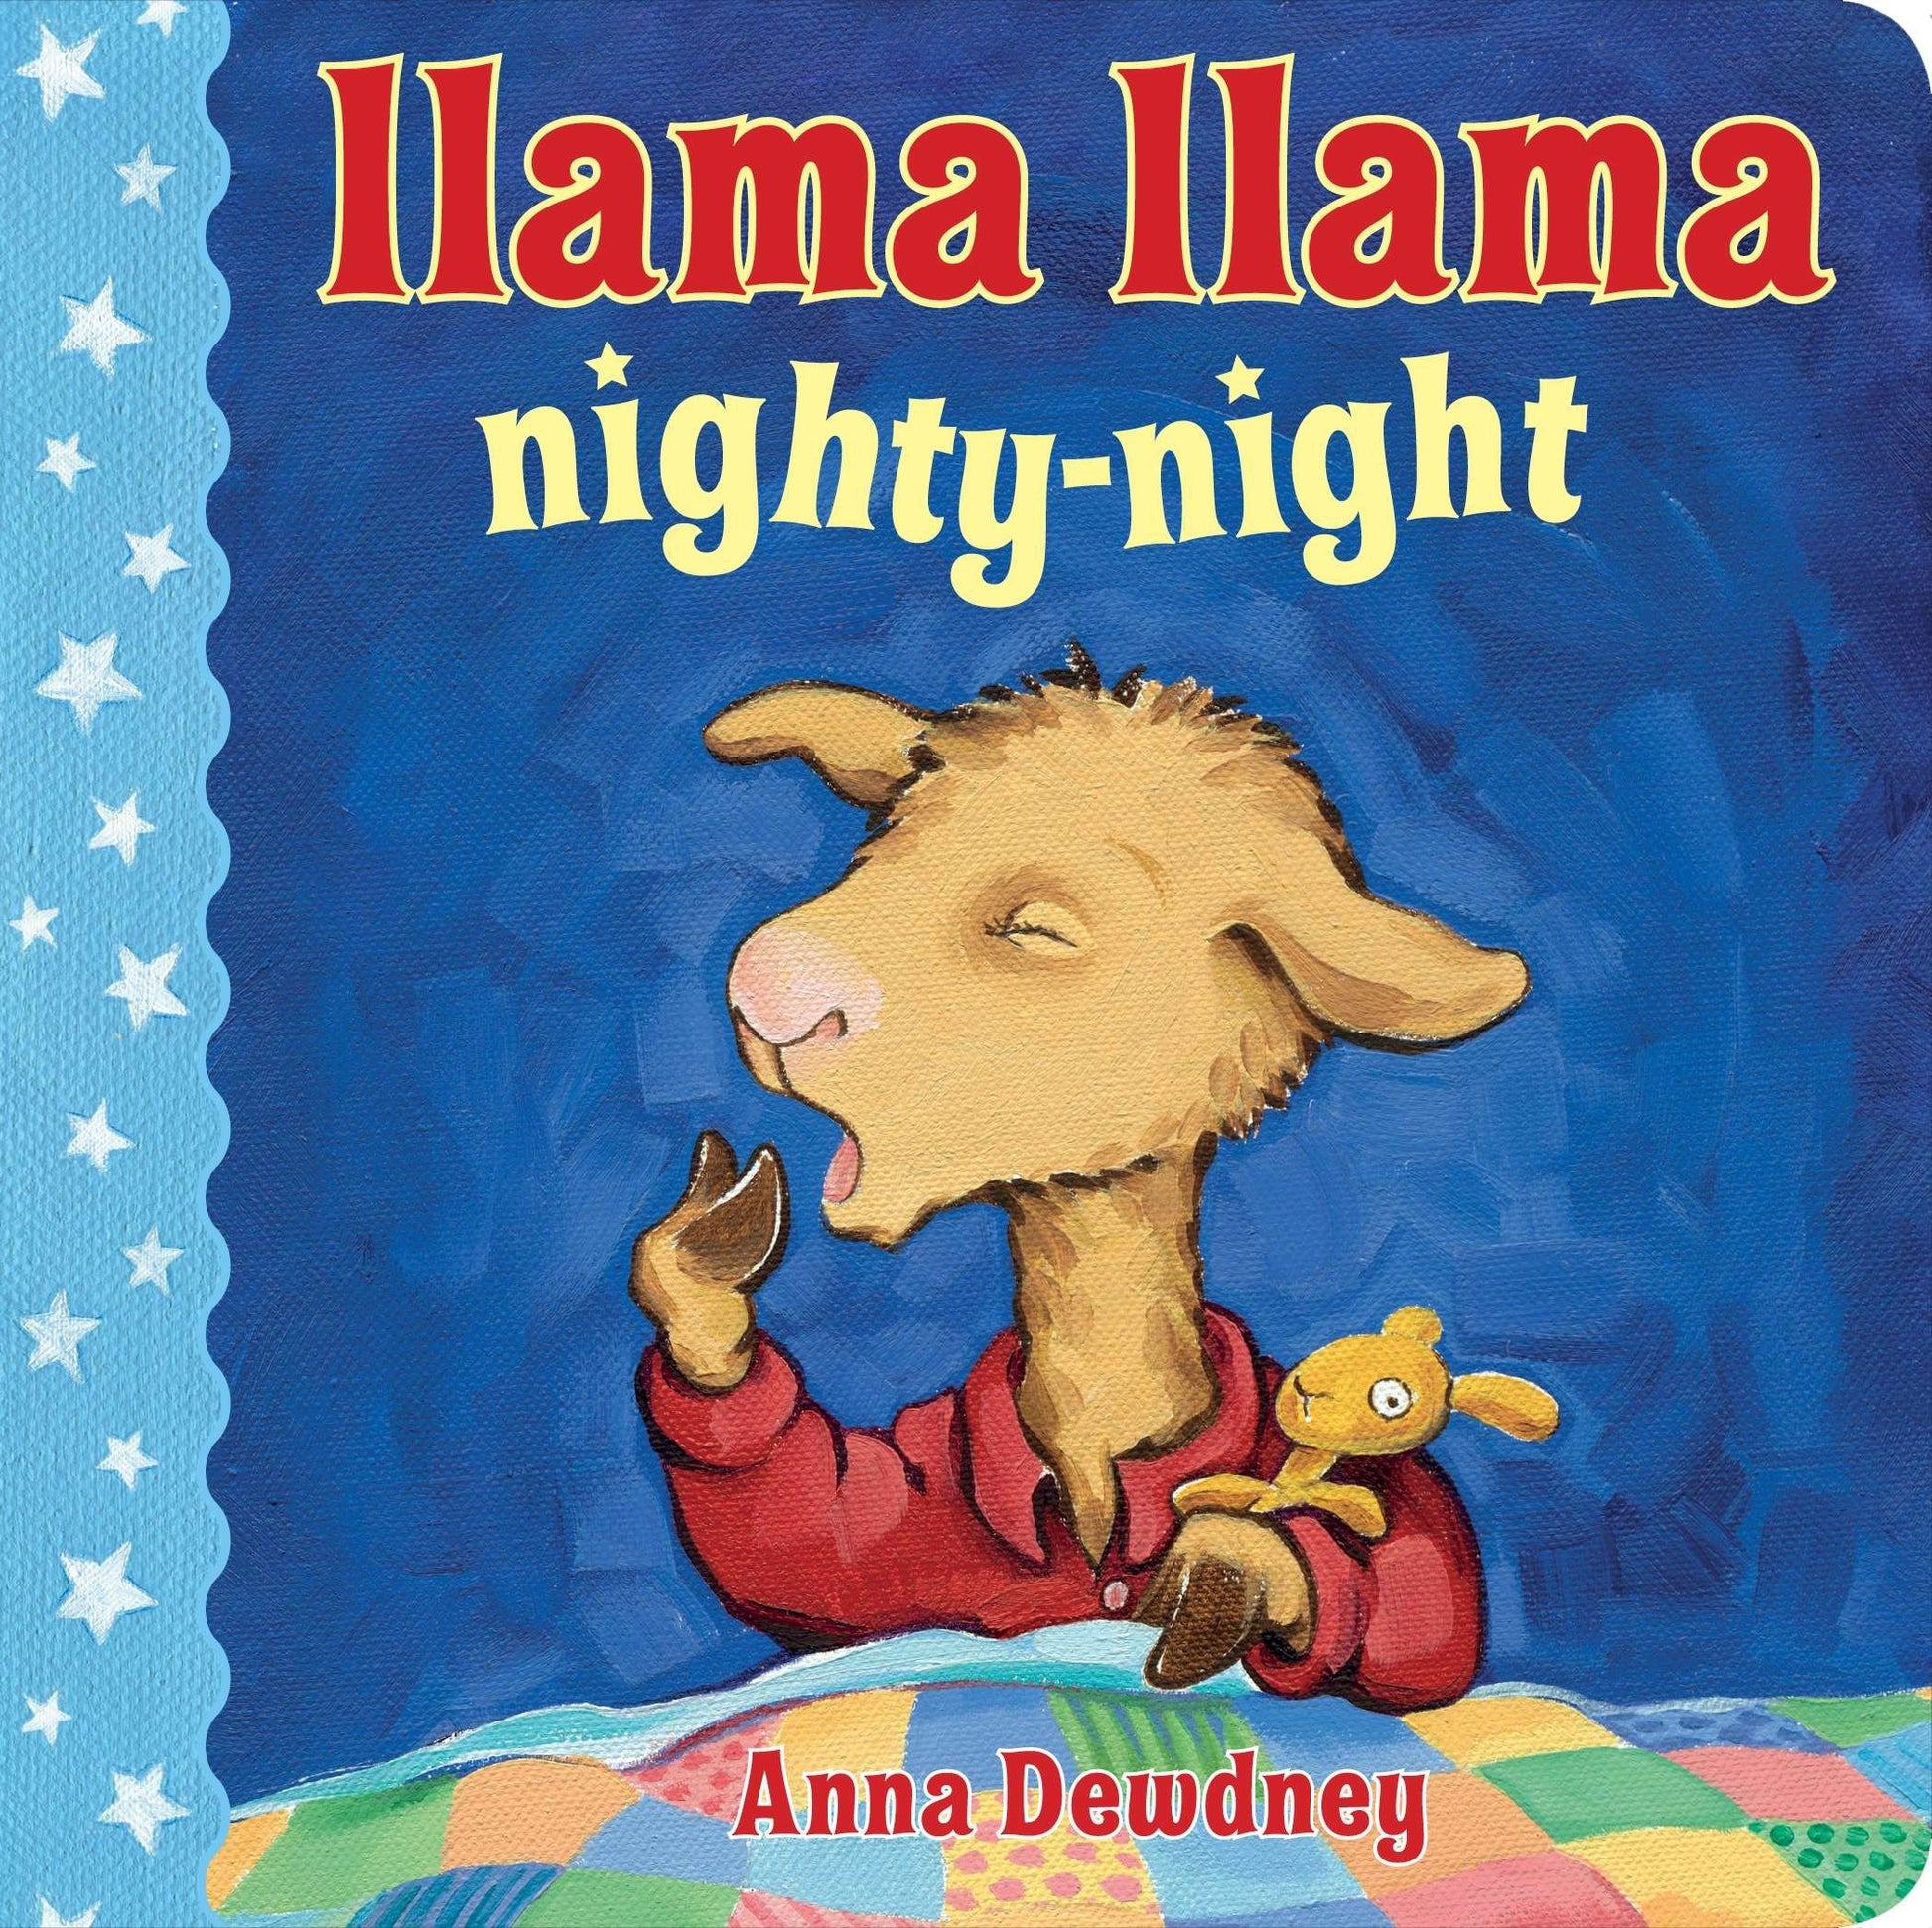 front cover of book with illustration of a llama in bed, title, and authors name